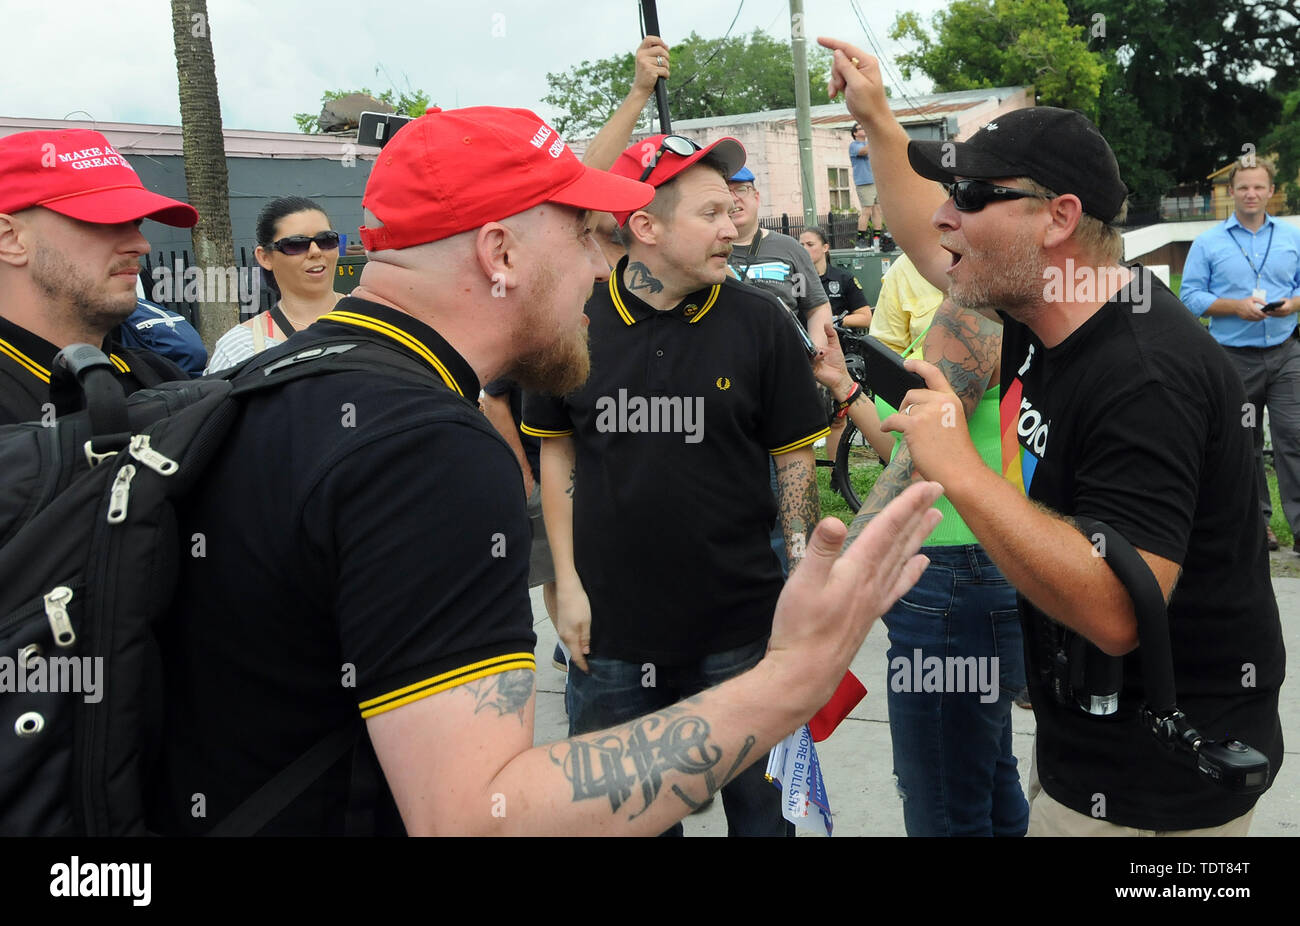 Orlando, Florida, USA. 18th June, 2019. Trump supporters and Trump protesters argue near the site of a Make America Great Again rally at the Amway Center on June 18, 2019 in Orlando, Florida. The rally is billed as U.S. President Donald Trump's kick-off event for his campaign for re-election in 2020. Credit: Paul Hennessy/Alamy Live News Stock Photo